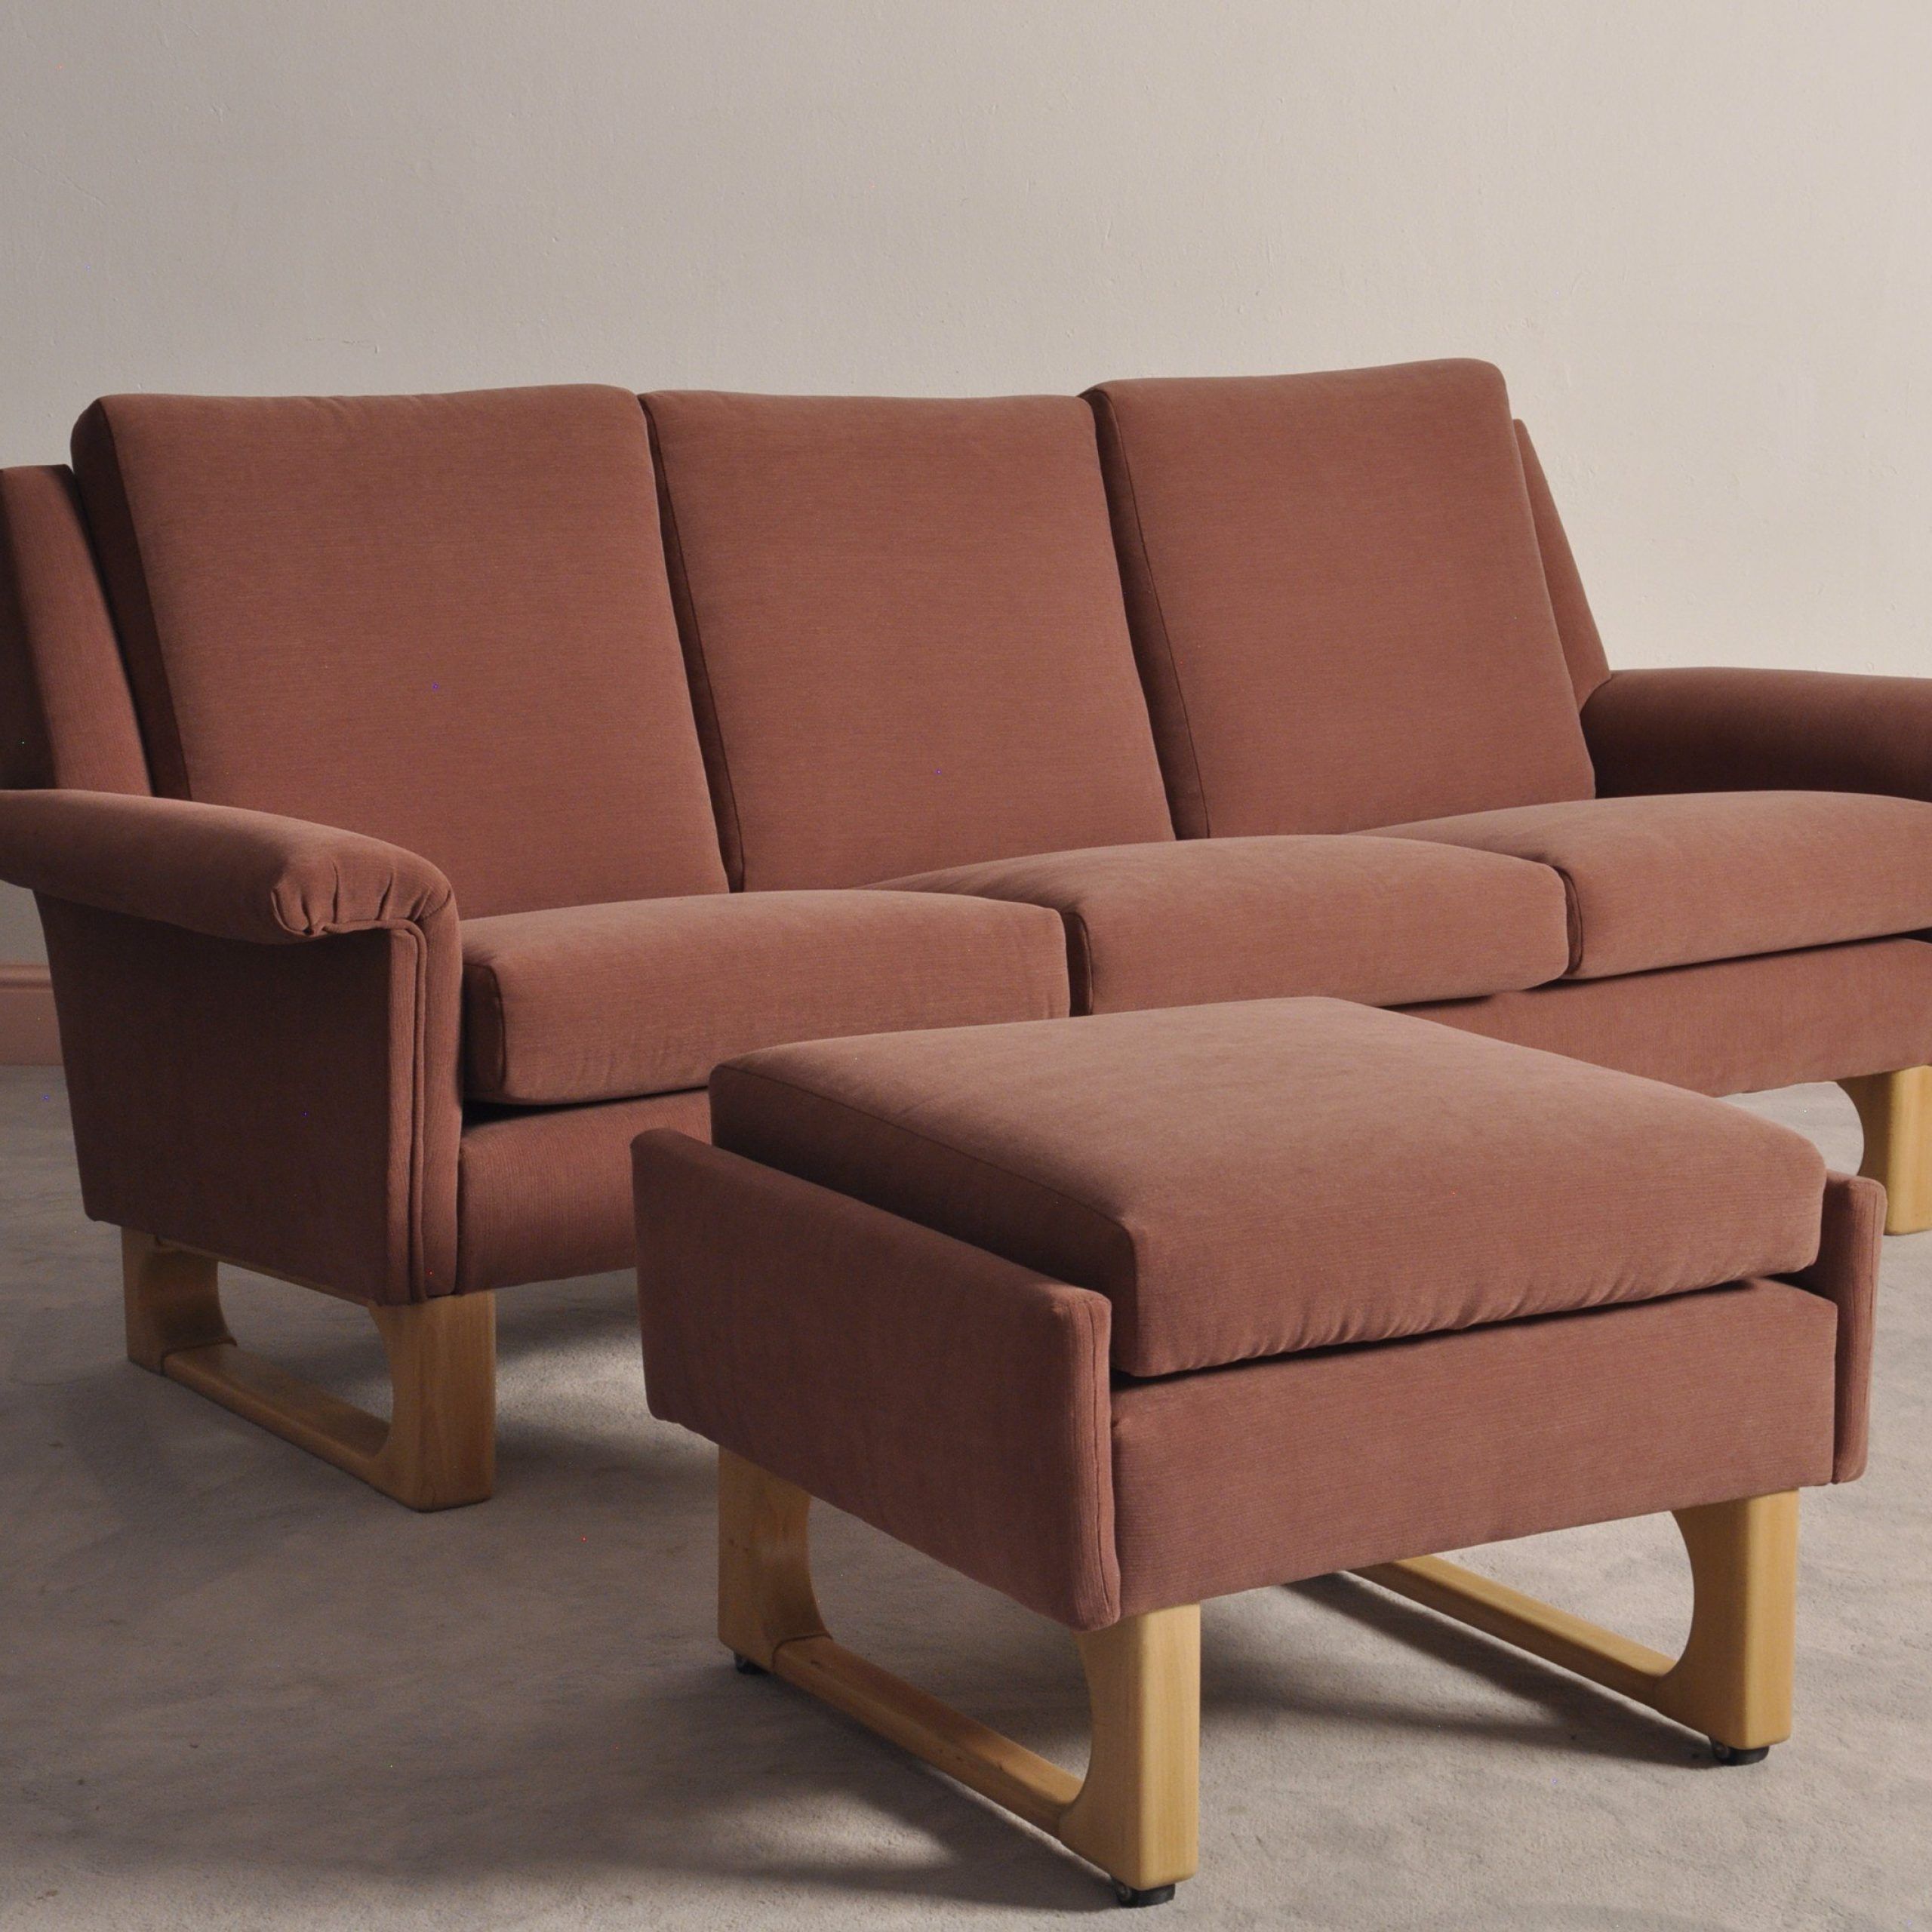 Famous Mid Century 3 Seat Couches Pertaining To Scandinavian Mid Century 3 Seater Sofa & Ottoman – 1970s – Design Market (View 10 of 15)